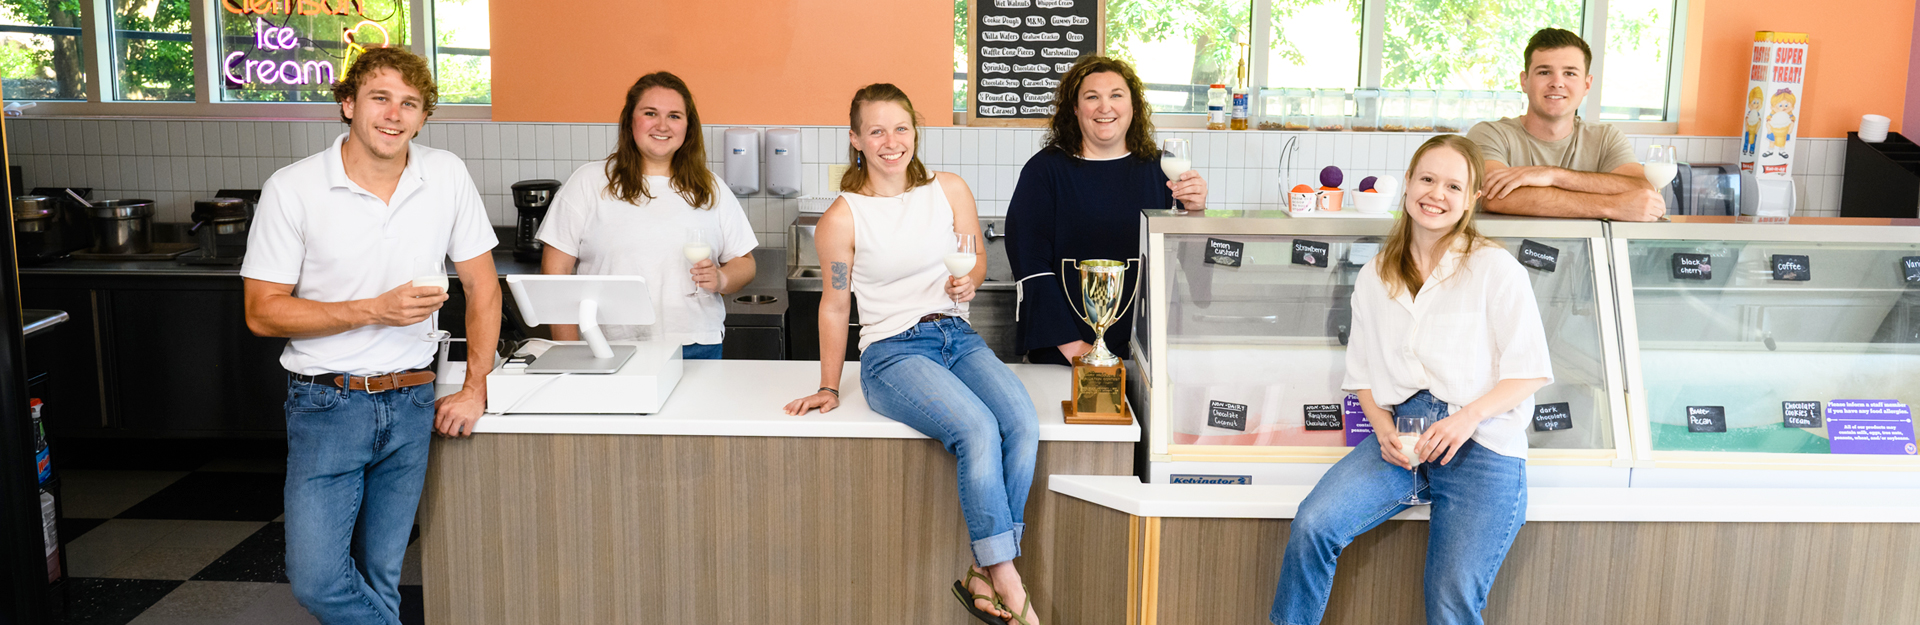 group photo of students sitting on the ice cream counter of clemson's 55 exchange ice cream shop